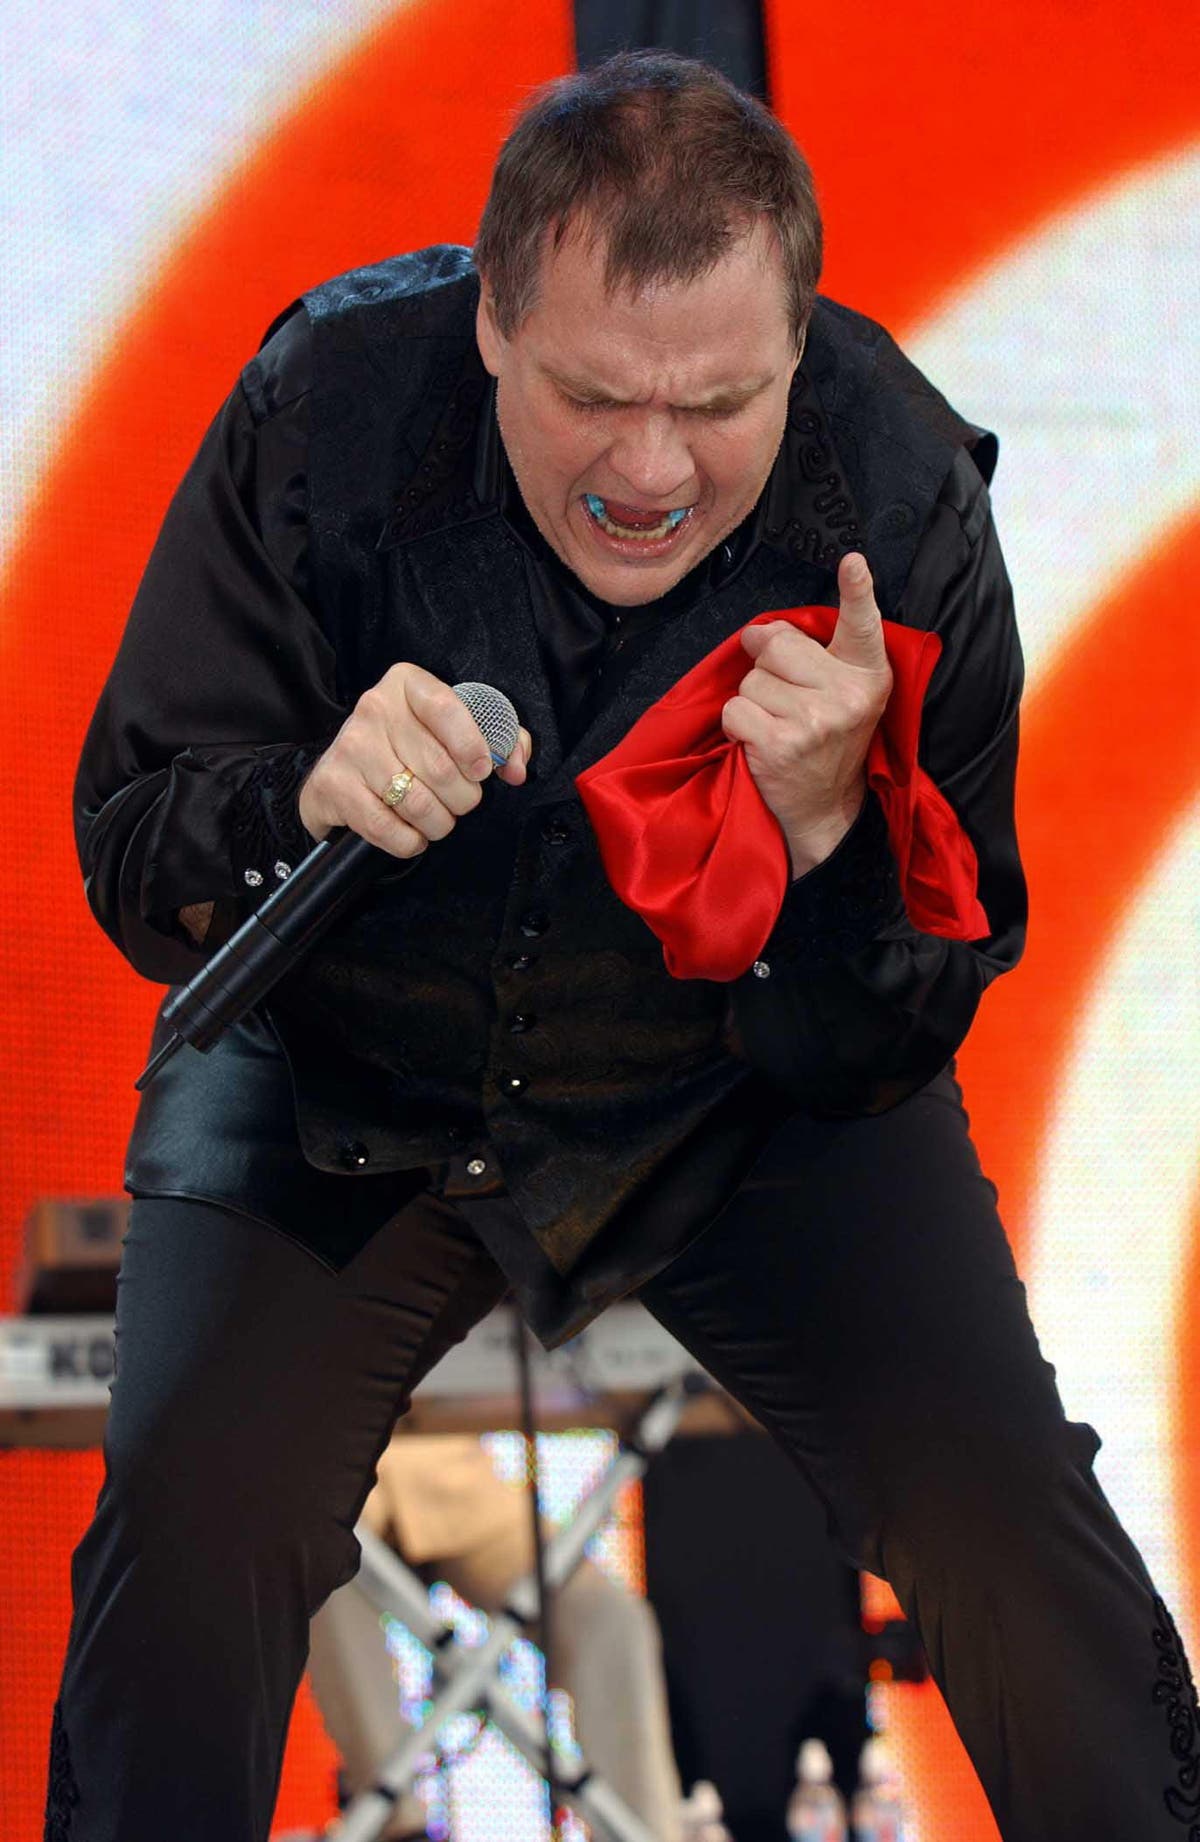 Collaborator share fond memories of working with ‘kind and talented’ Meat Loaf